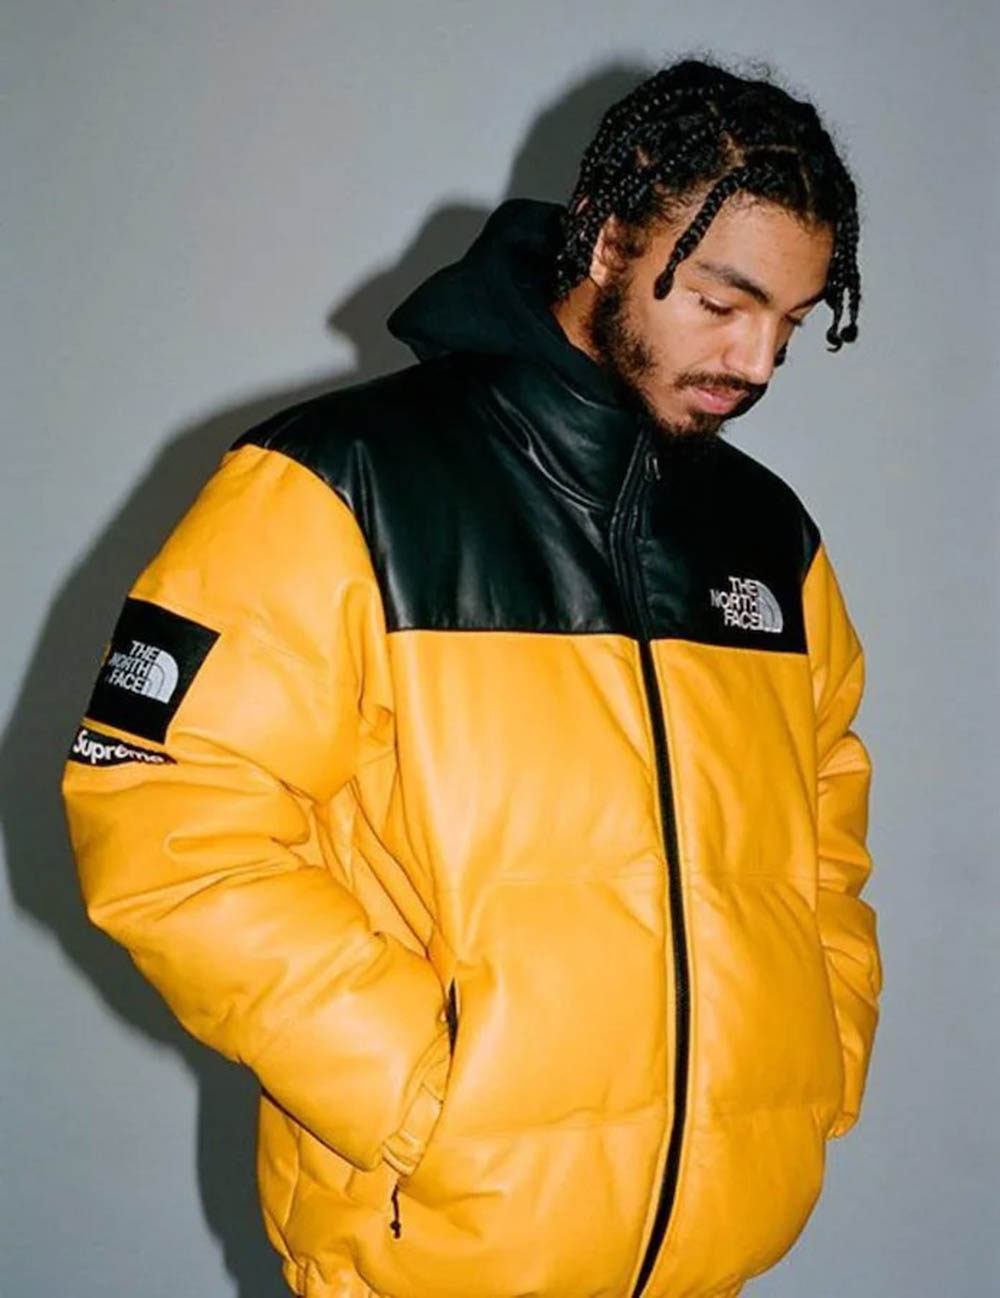 The North Face Leather Mountain Parka - fall winter 2018 - Supreme